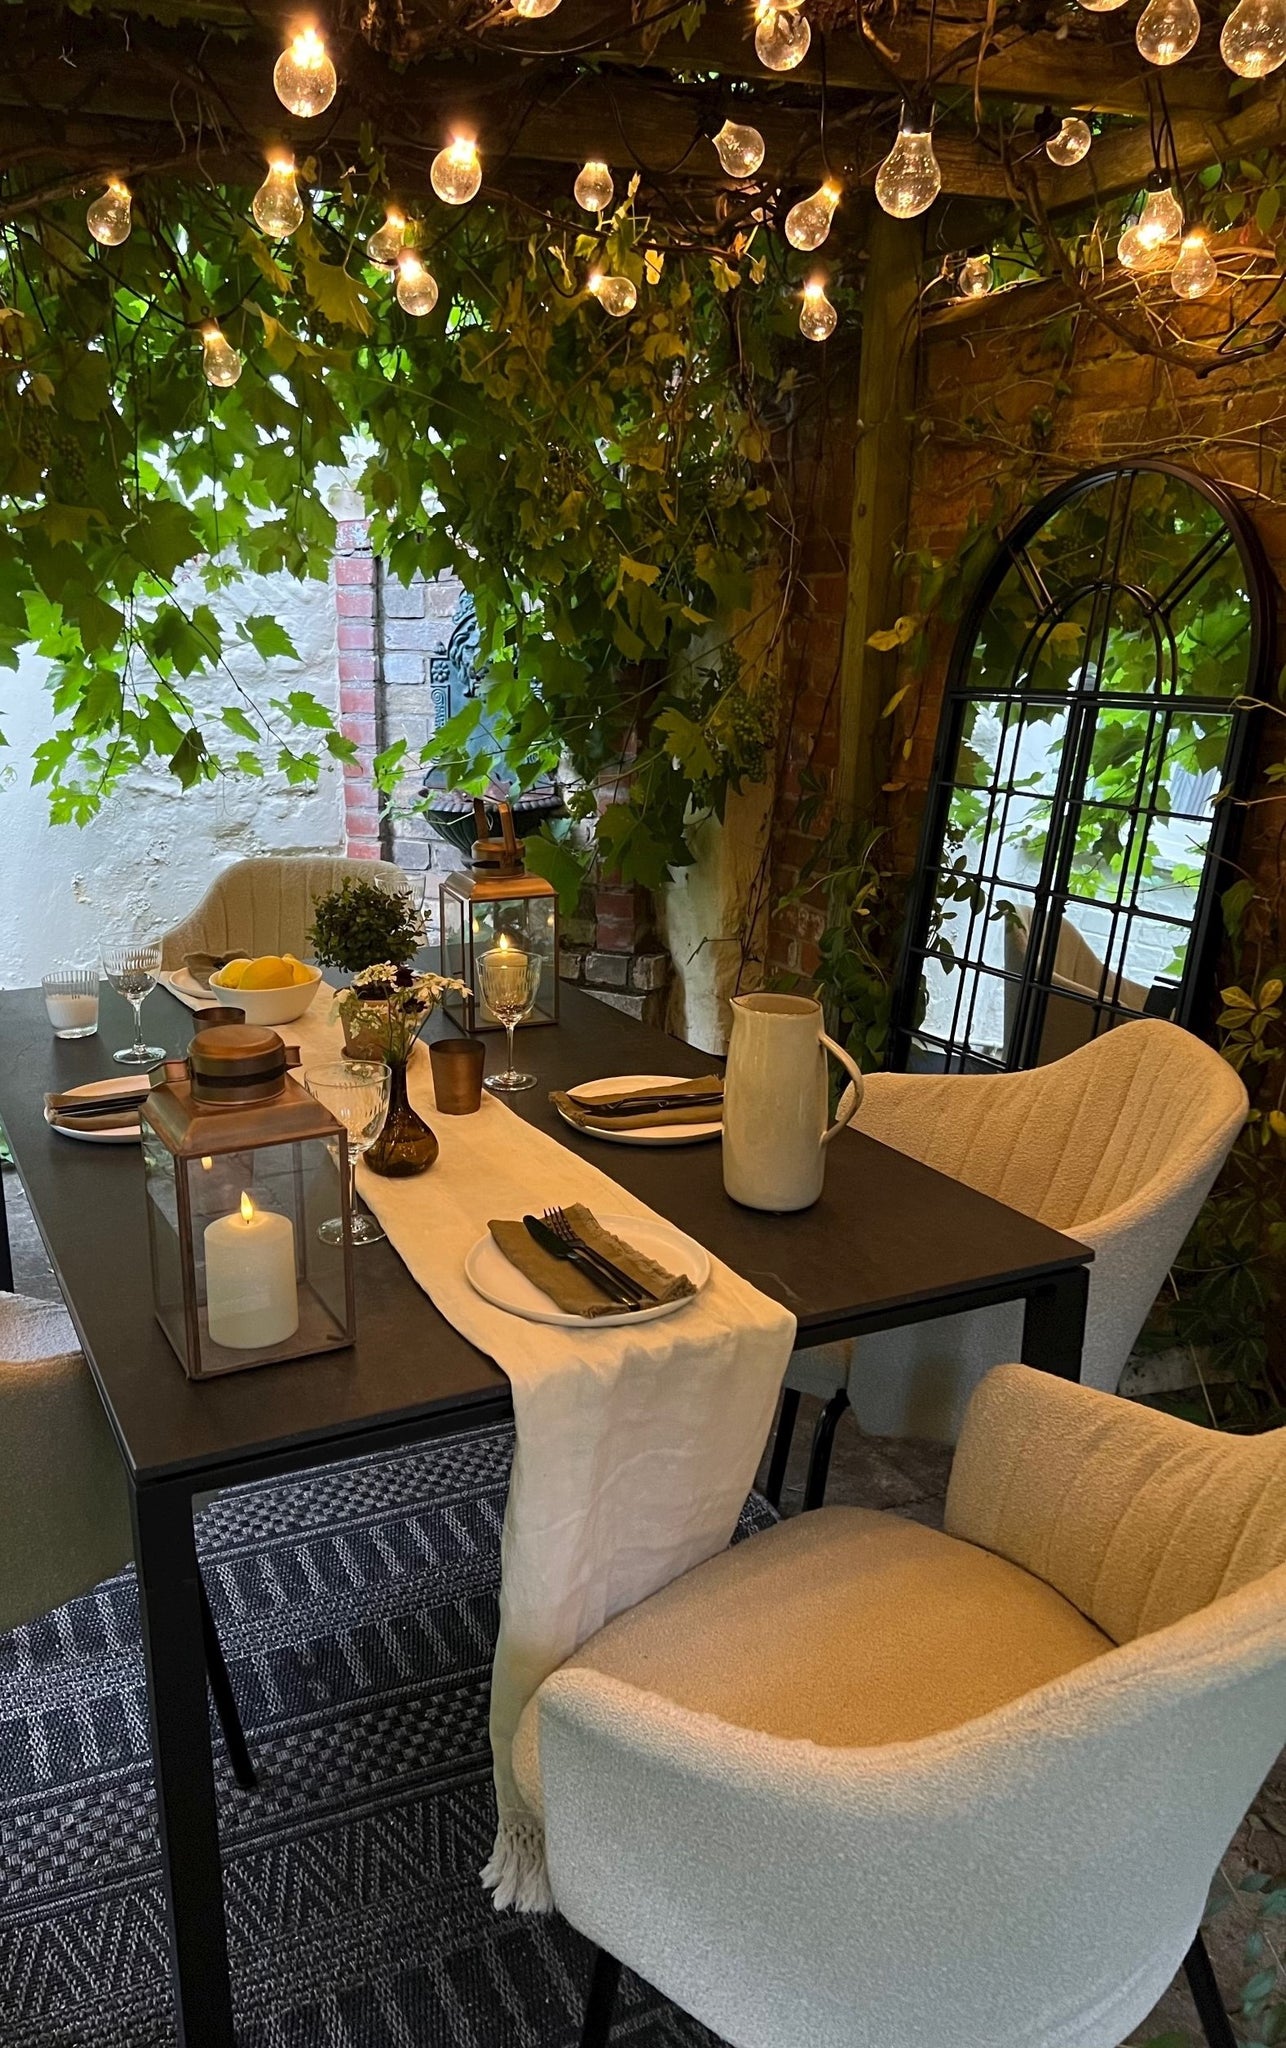 Afternoon cosiness under the pergola with light chain and stuning dining setting with modern black garden table and bouclé dining chairs for outdoors